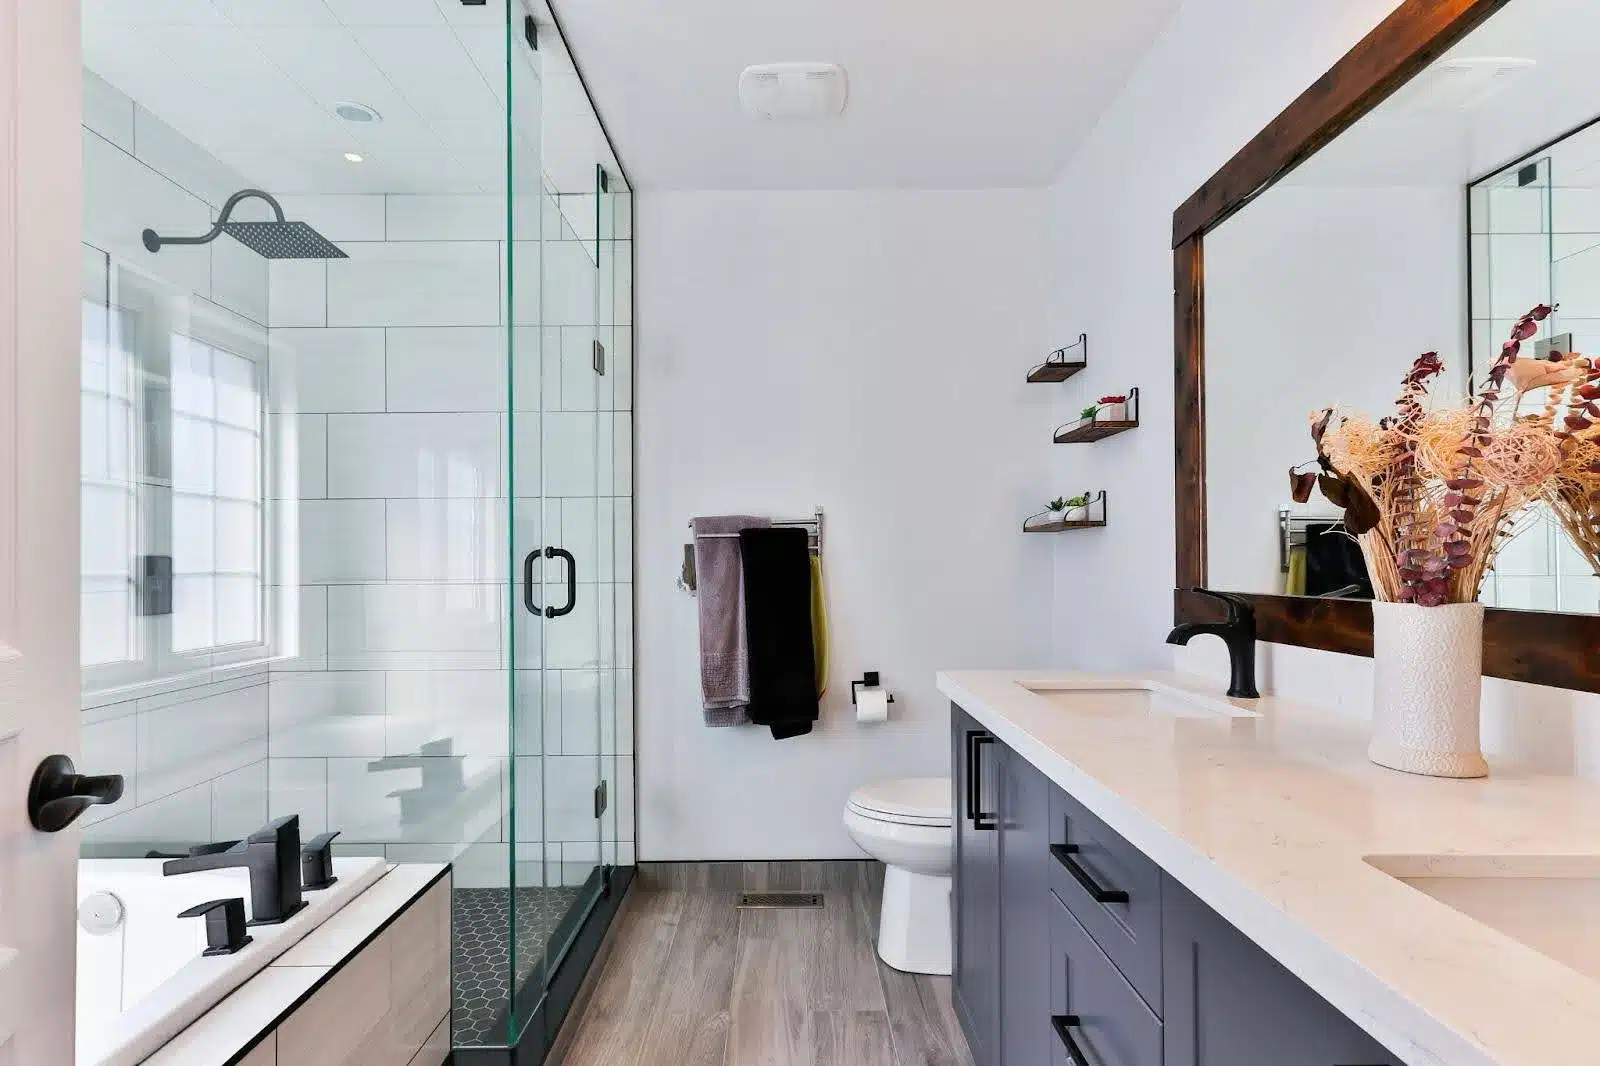 A clean, remodeled bathroom with a walk-in shower